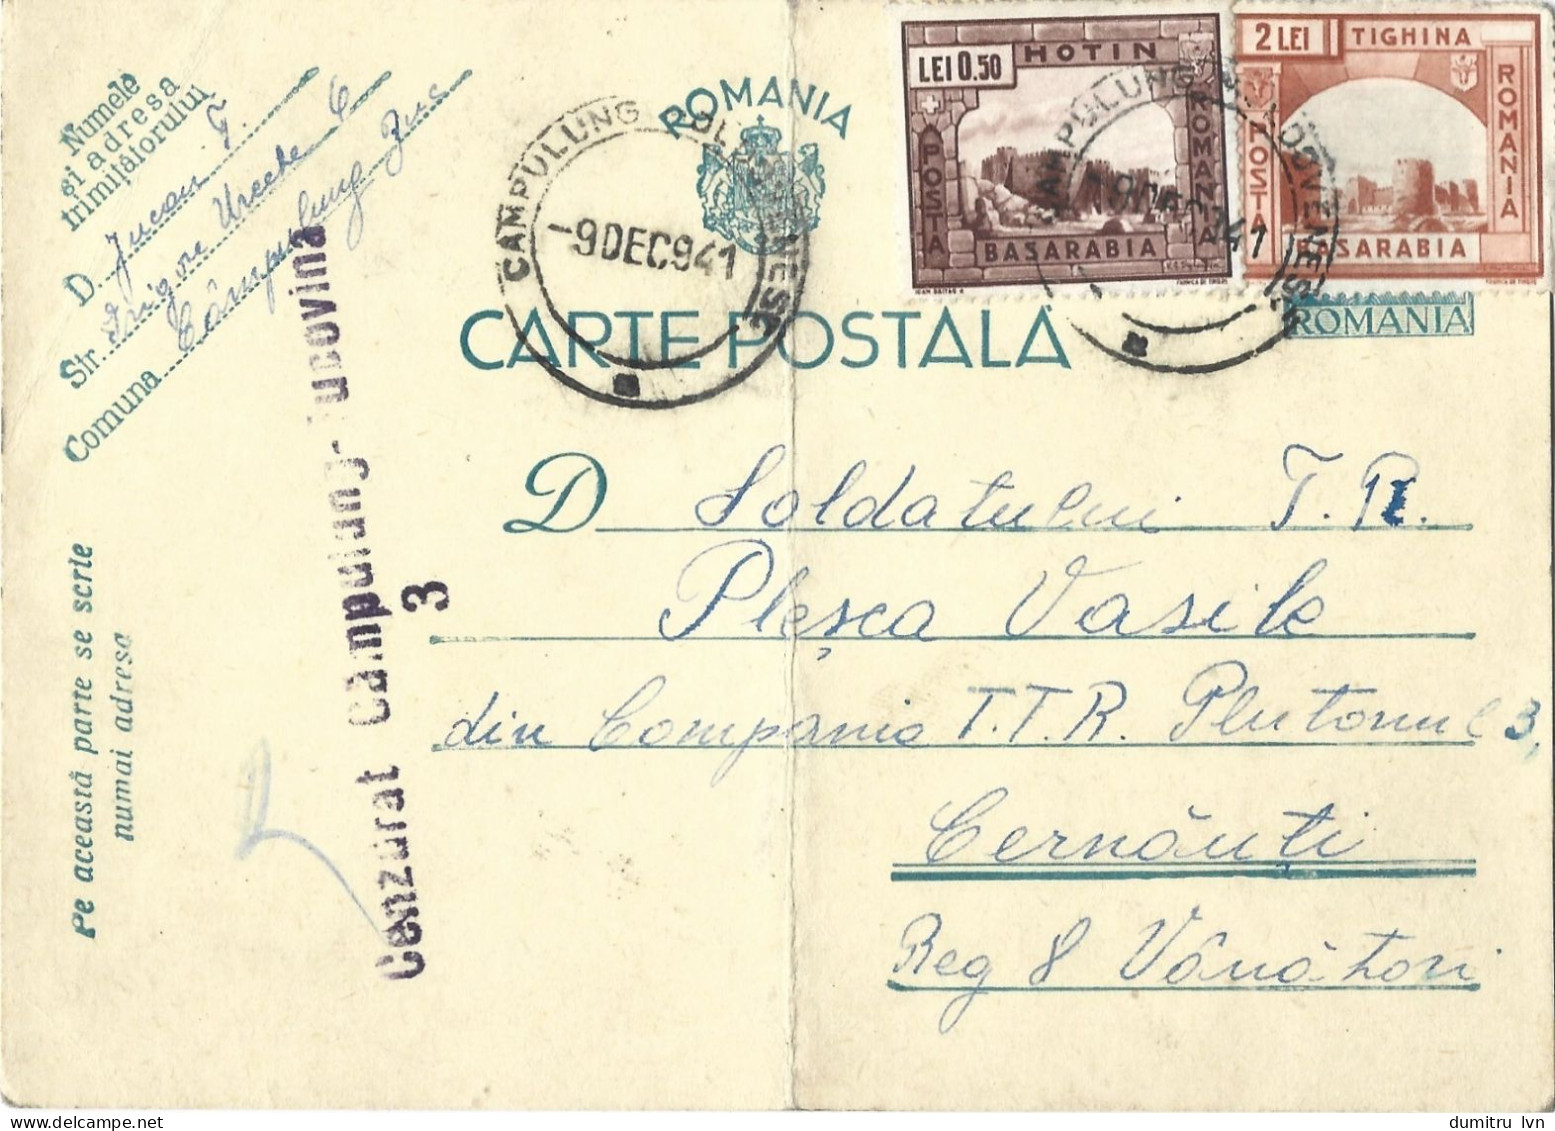 ROMANIA 1941 POSTCARD, CENSORED CAMPULUNG-BUCOVINA 3, STAMPS BASARABIA HOTIN, TIGHINA POSTCARD STATIONERY - Lettres 2ème Guerre Mondiale